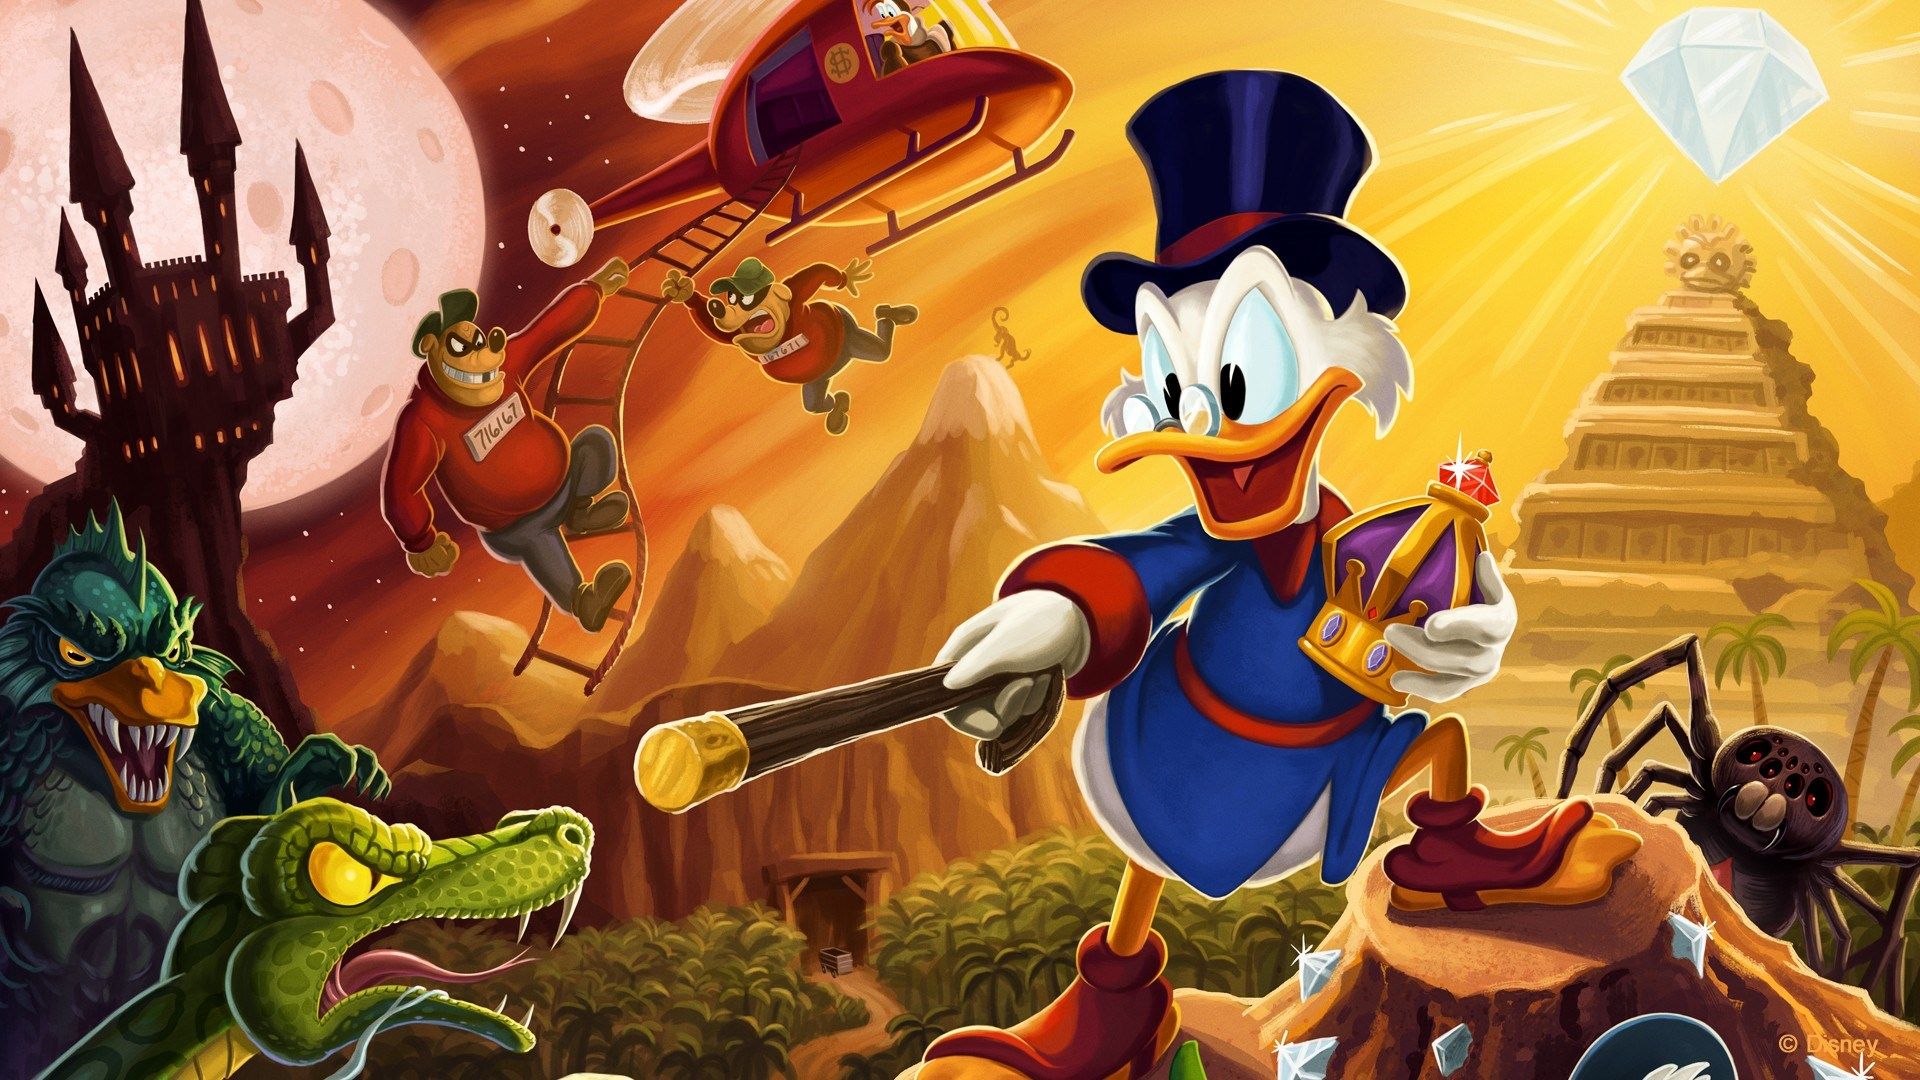 Can a Capitalist Save the World? Scrooge McDuck Thinks so!